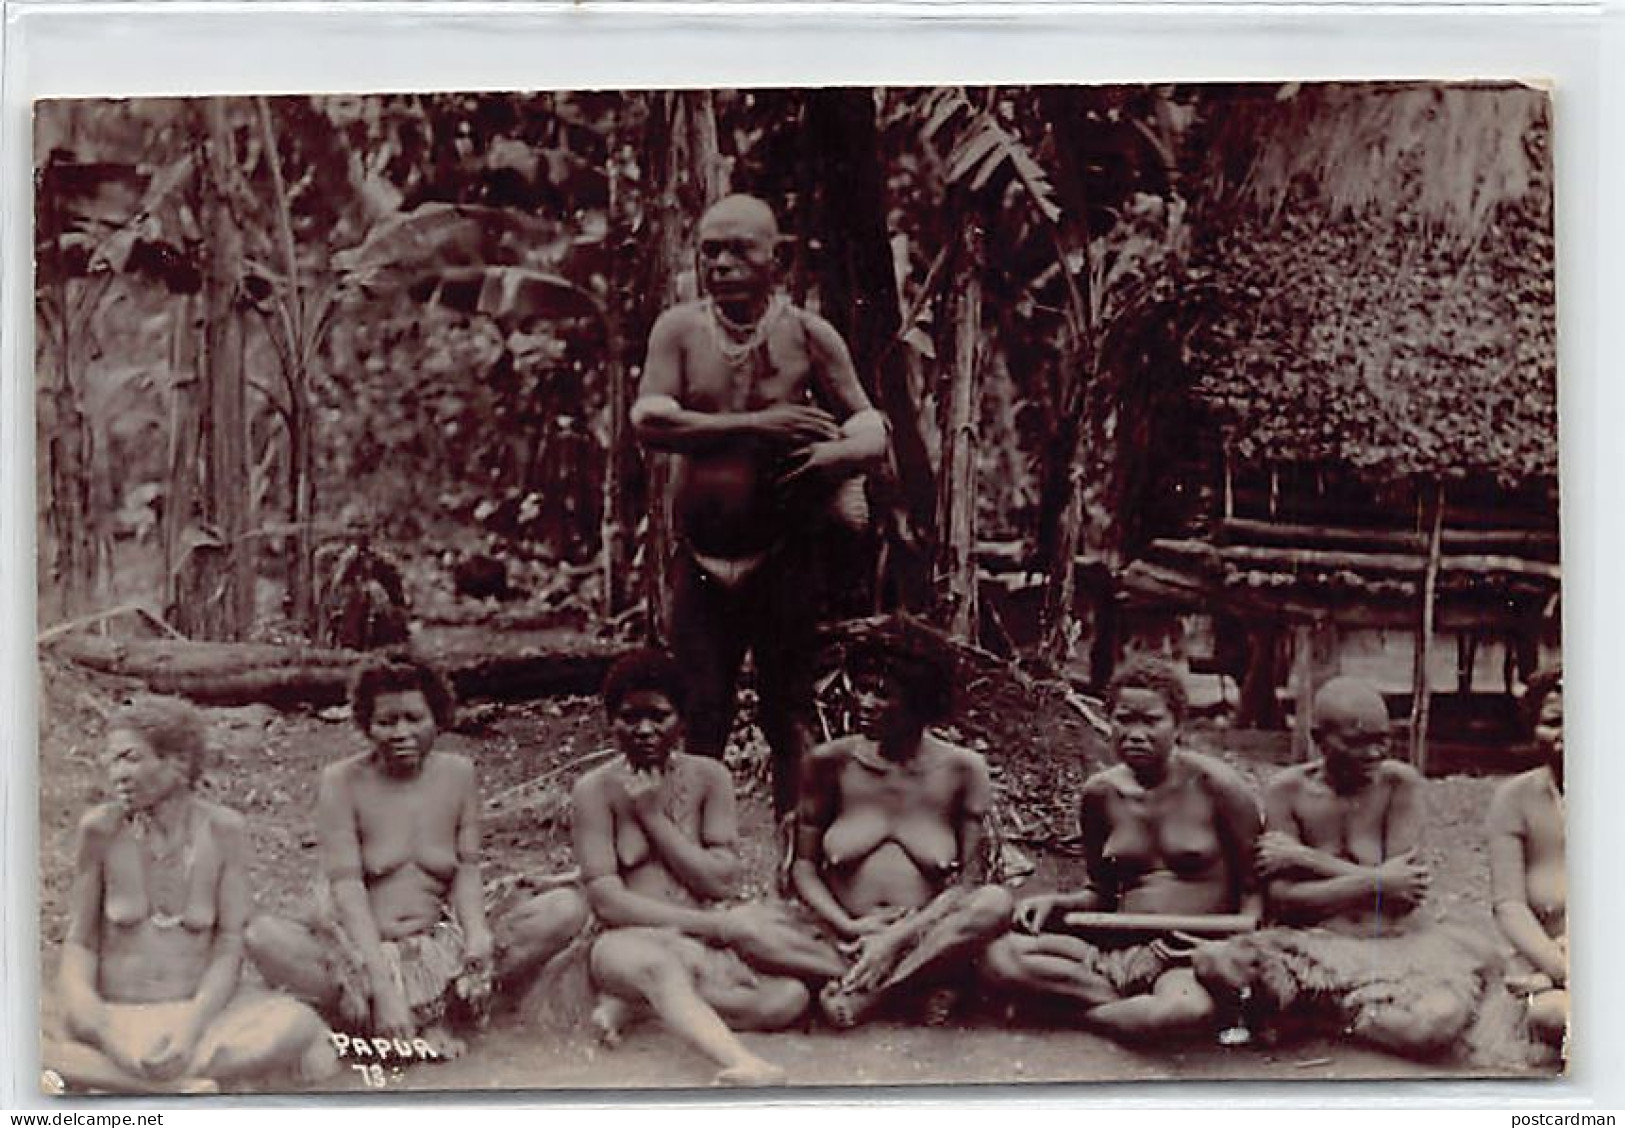 PAPUA NEW GUINEA - Papuan Chief And His Nude Wives - REAL PHOTO - Publ. W. H. Cooper. - Papua-Neuguinea